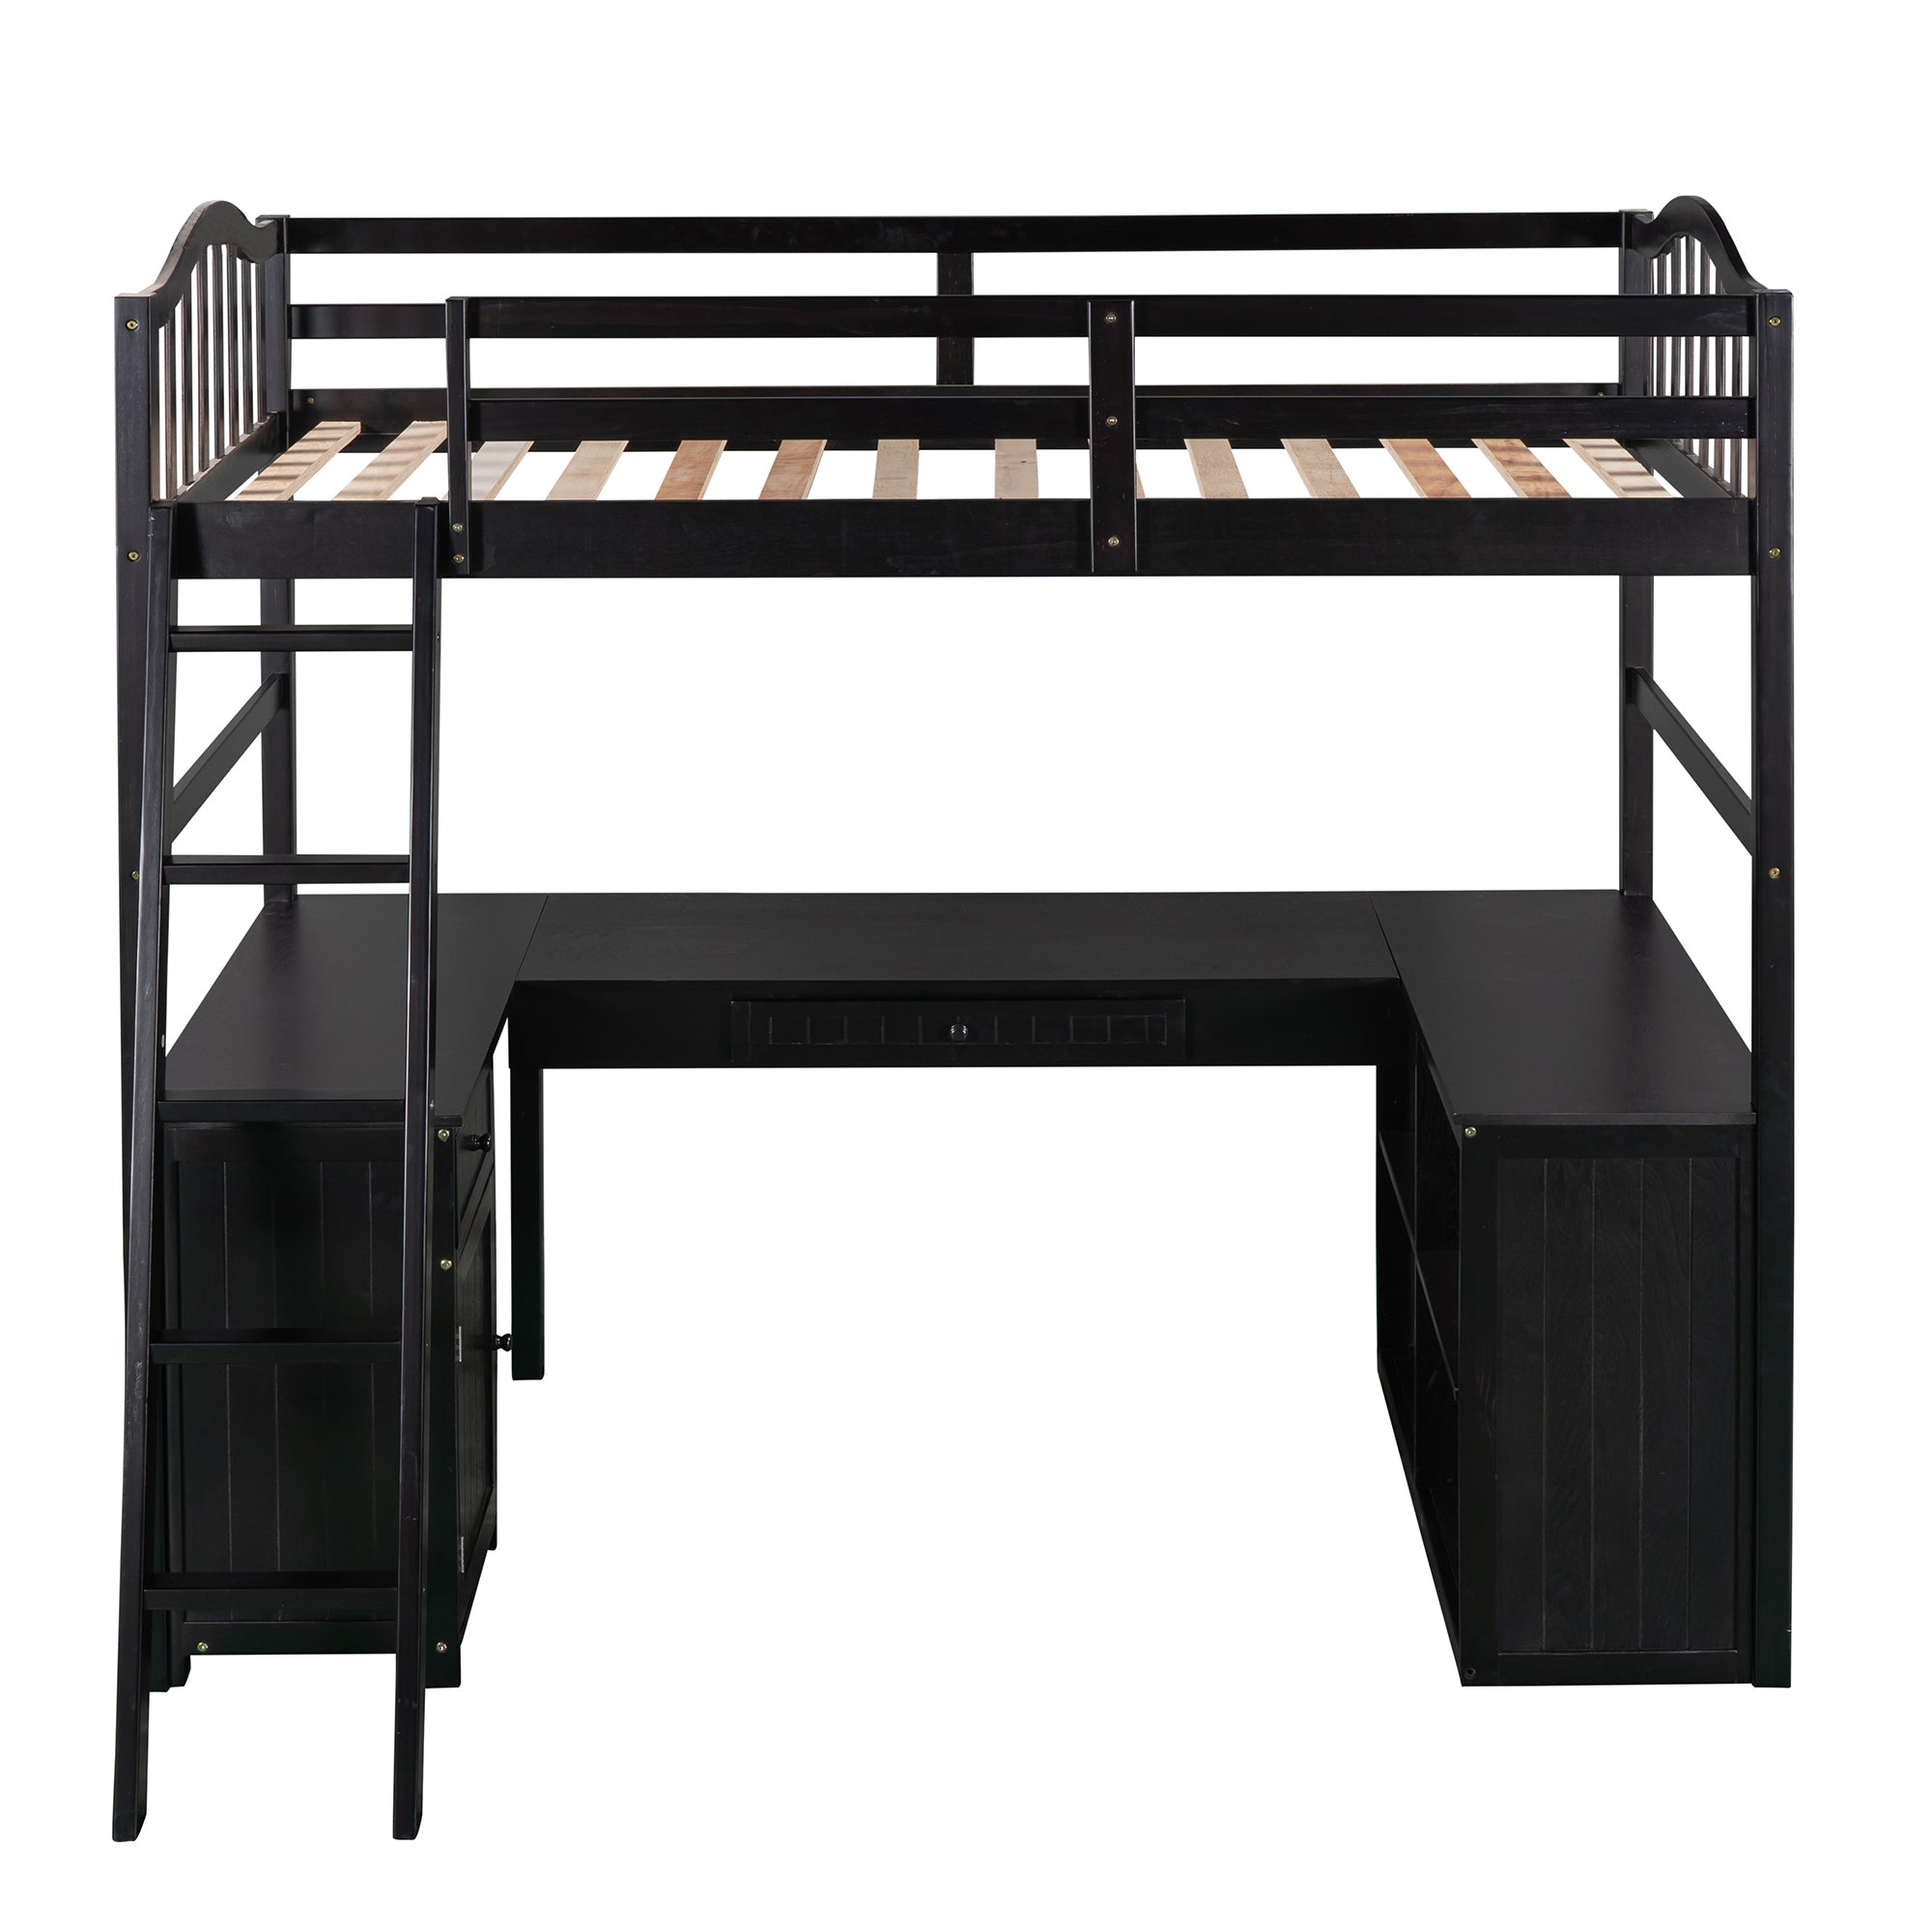 Twin size Loft Bed with Drawers (Espresso)